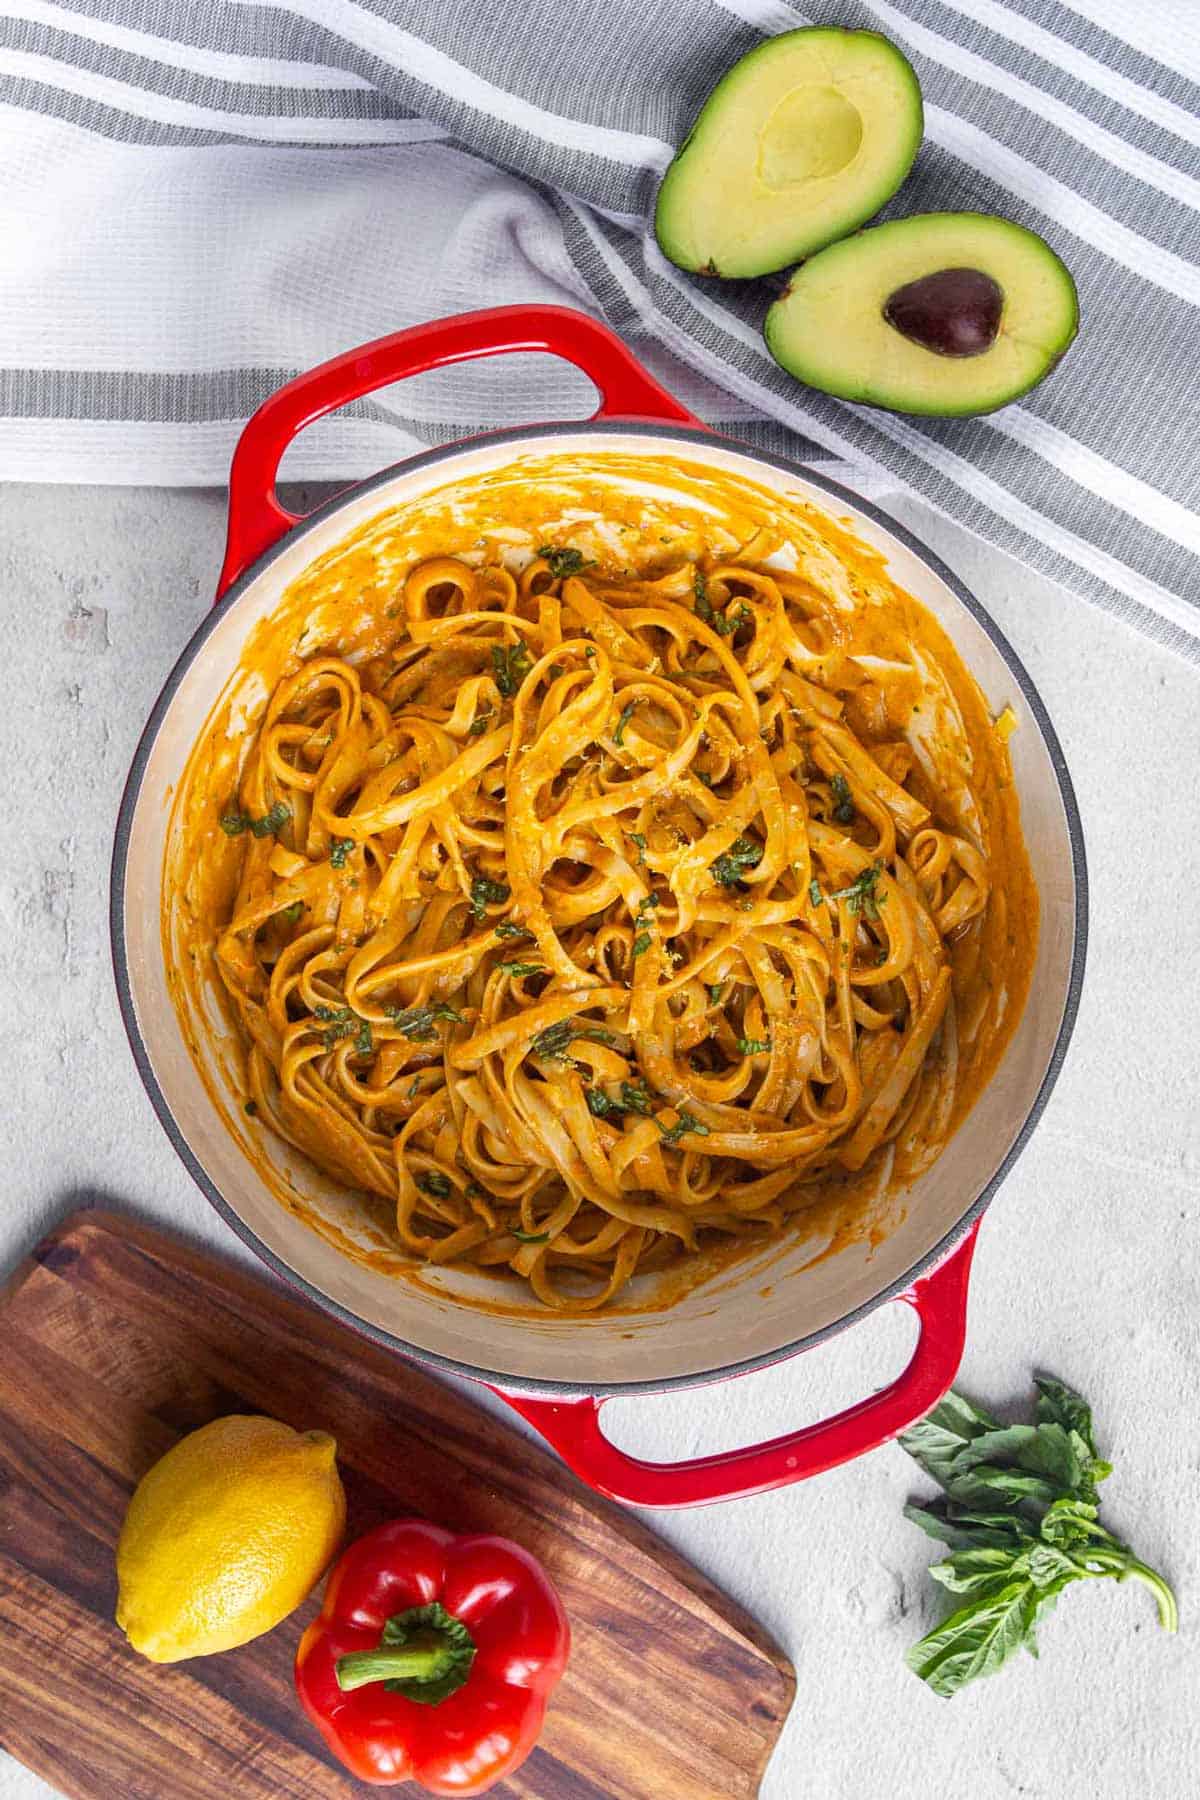 Top down view of cast iron dutch oven filled with fettuccine coated in creamy roasted red pepper sauce and garnished with fresh basil. The sauce is thick and creamy.